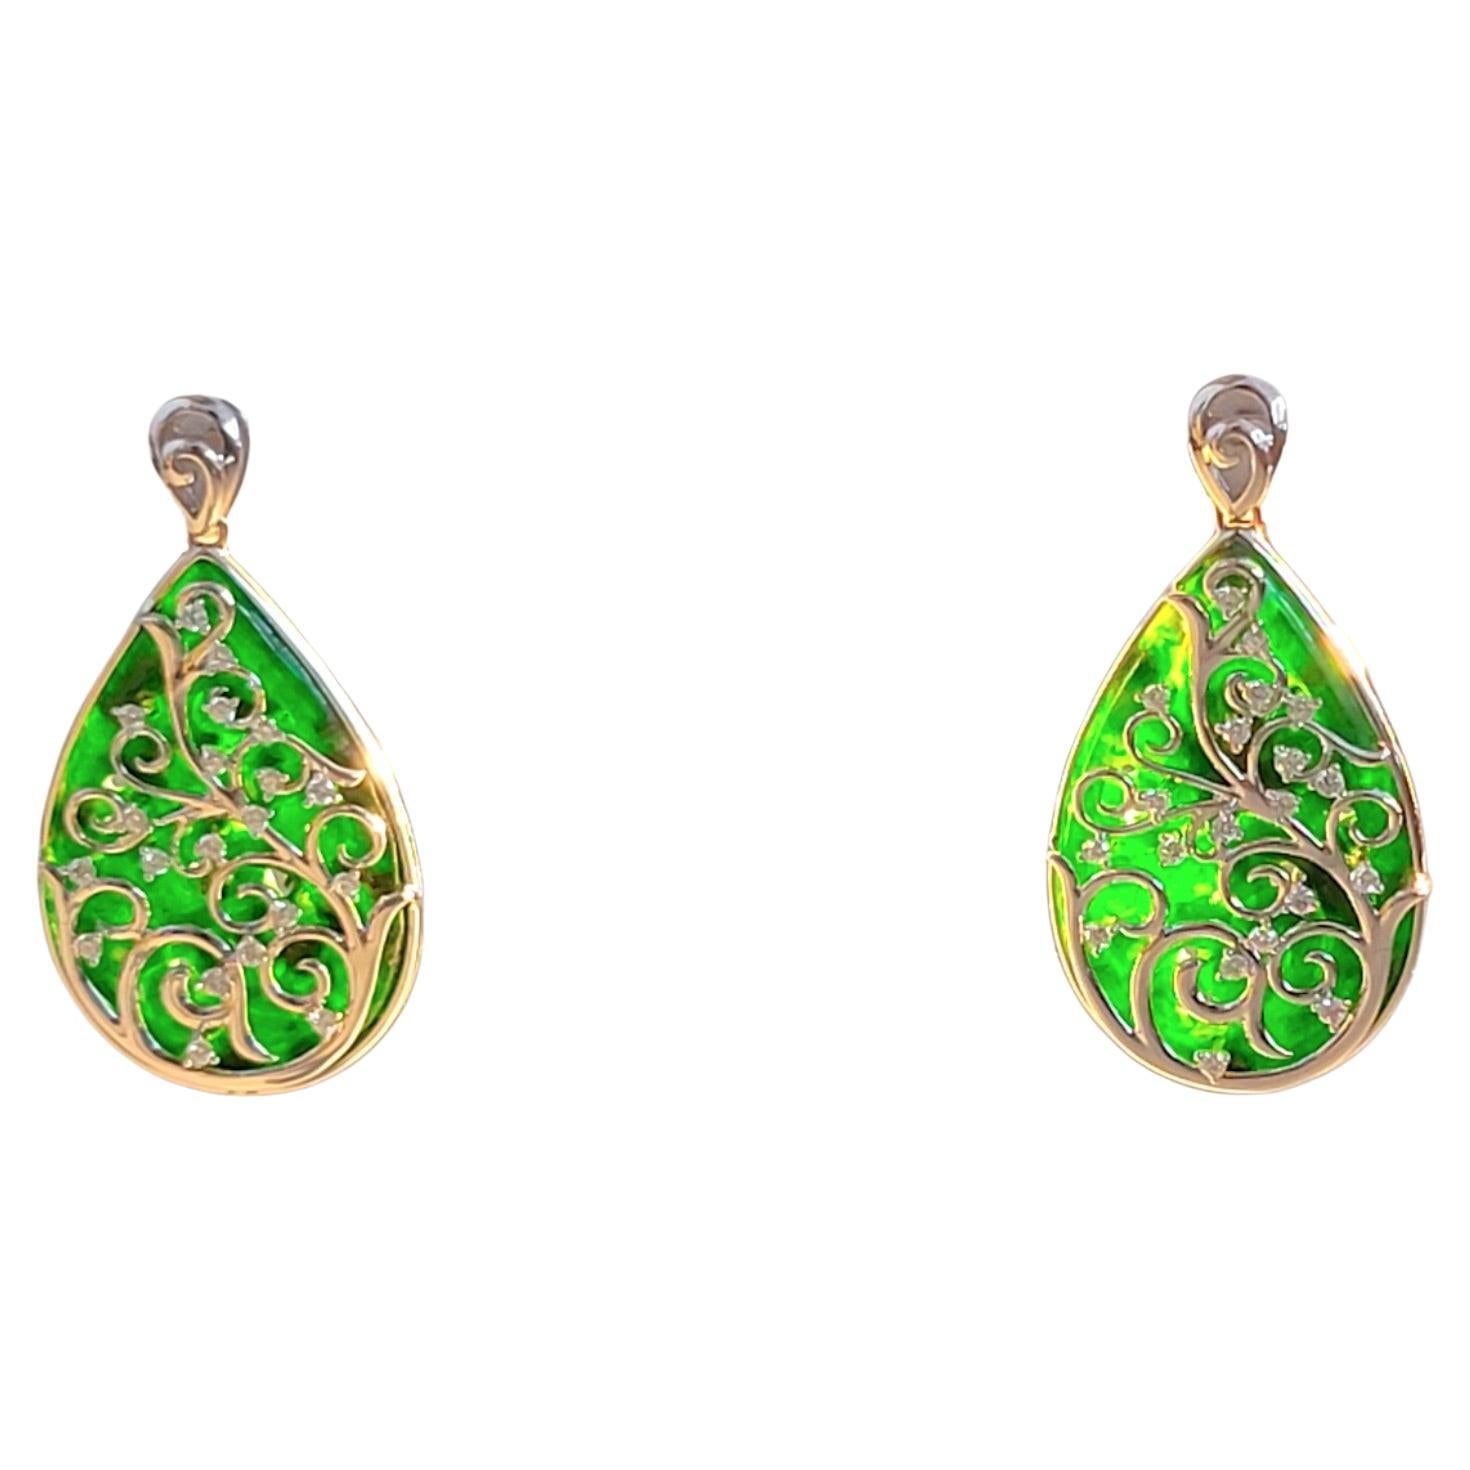 Jade Laboratory Certified Handmade Earrings with Untreated 100% Natural Burmese A-Jade, 18K White Gold, and White Round Brilliant Diamonds. This piece is completely made in Hong Kong. 


These Earrings were designed by our founder, and hand carved